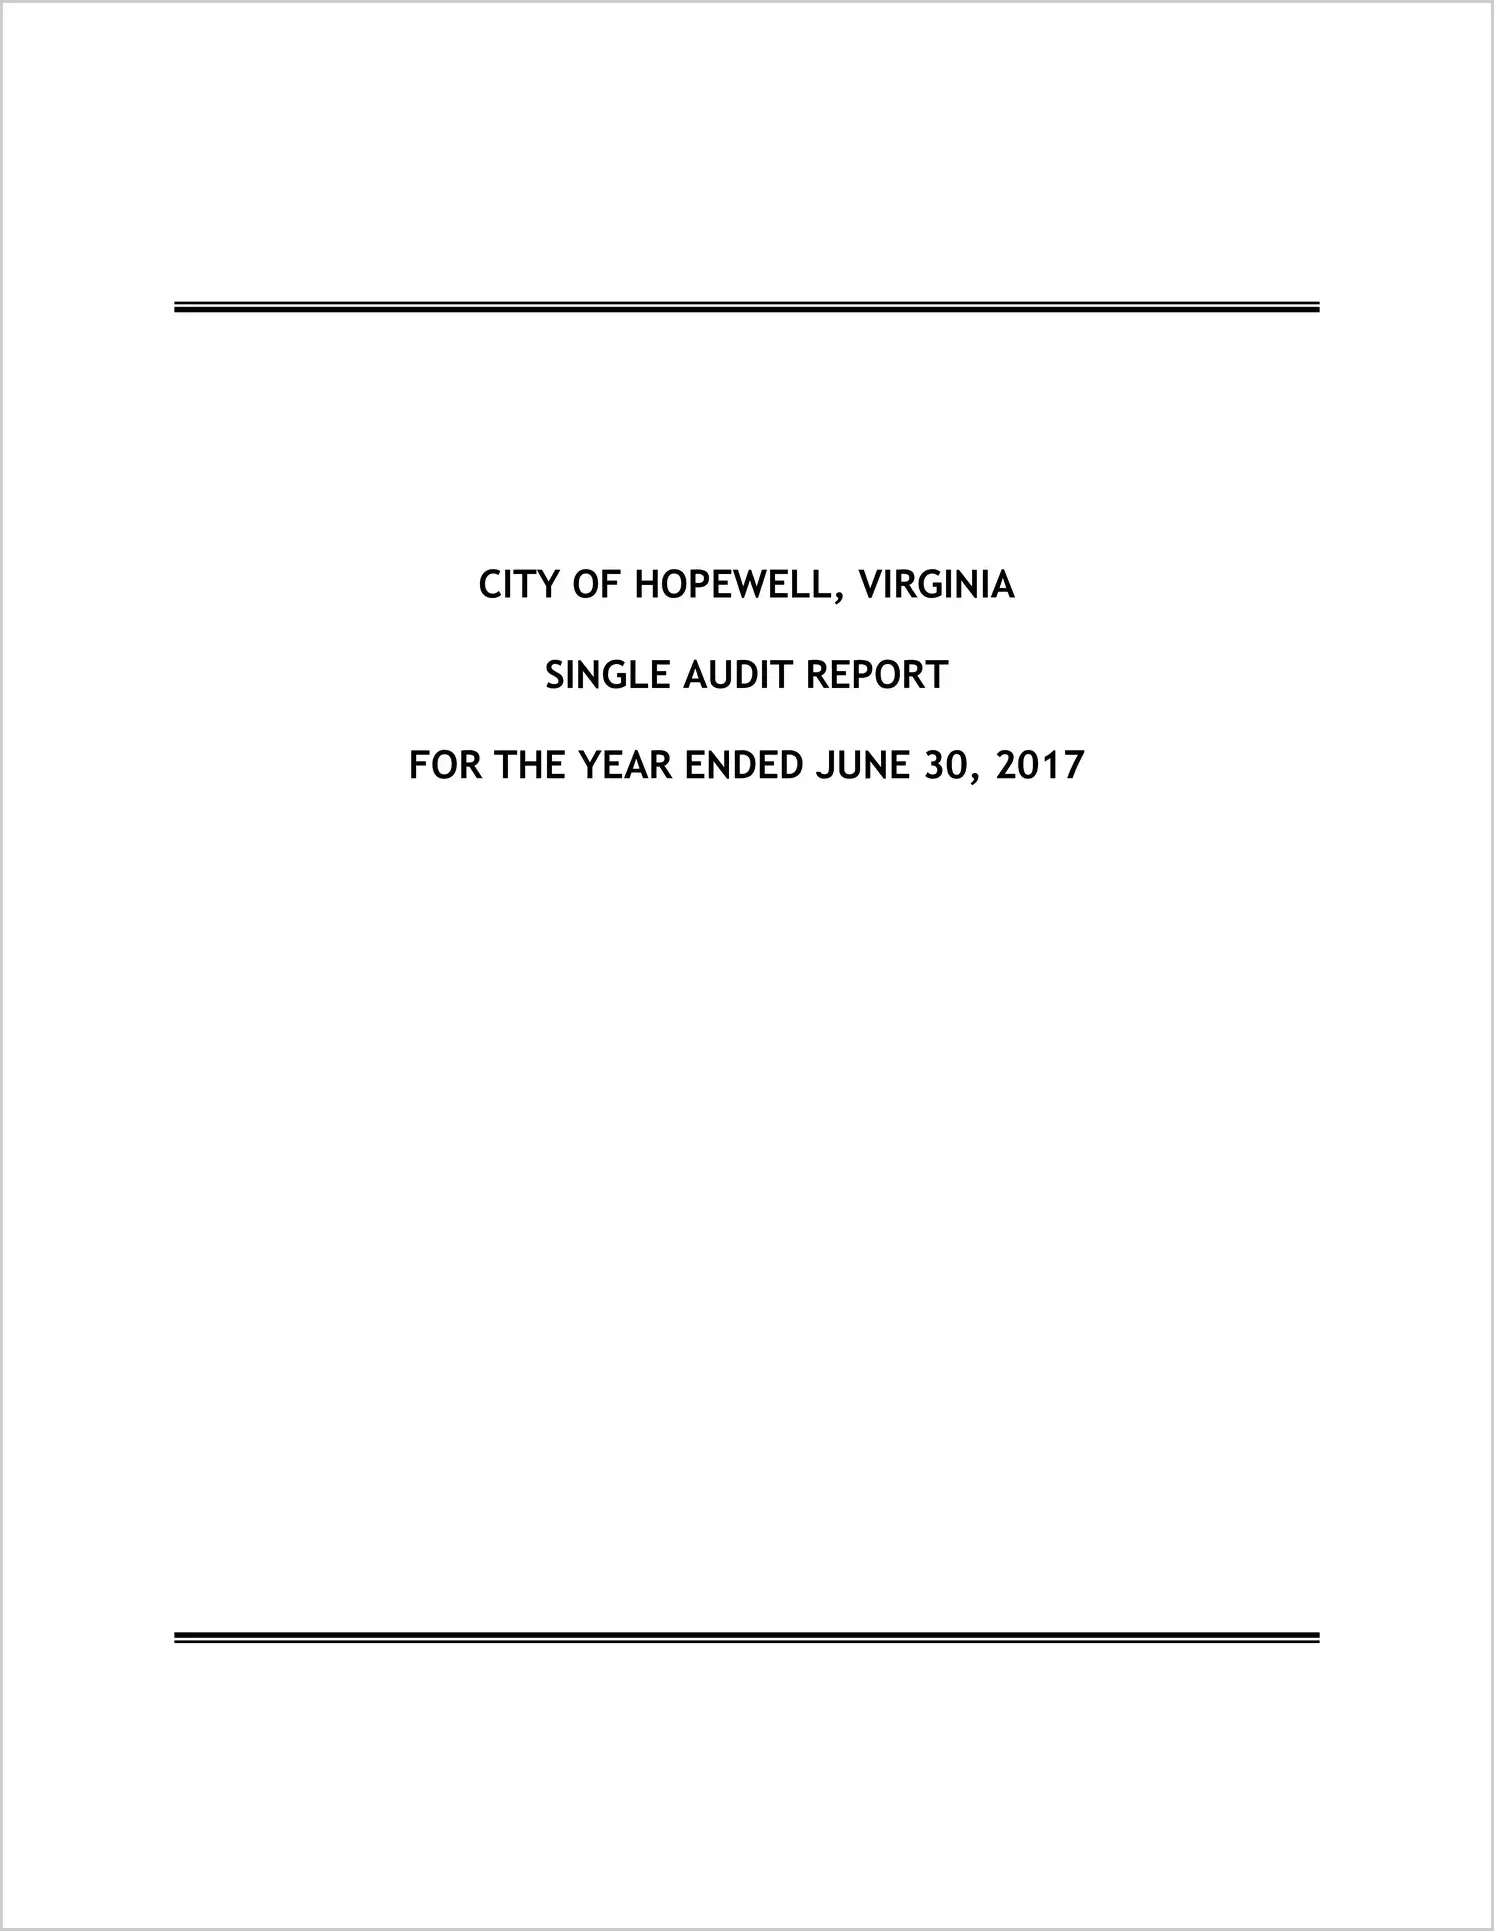 2017 Internal Control and Compliance Report for City of Hopewell